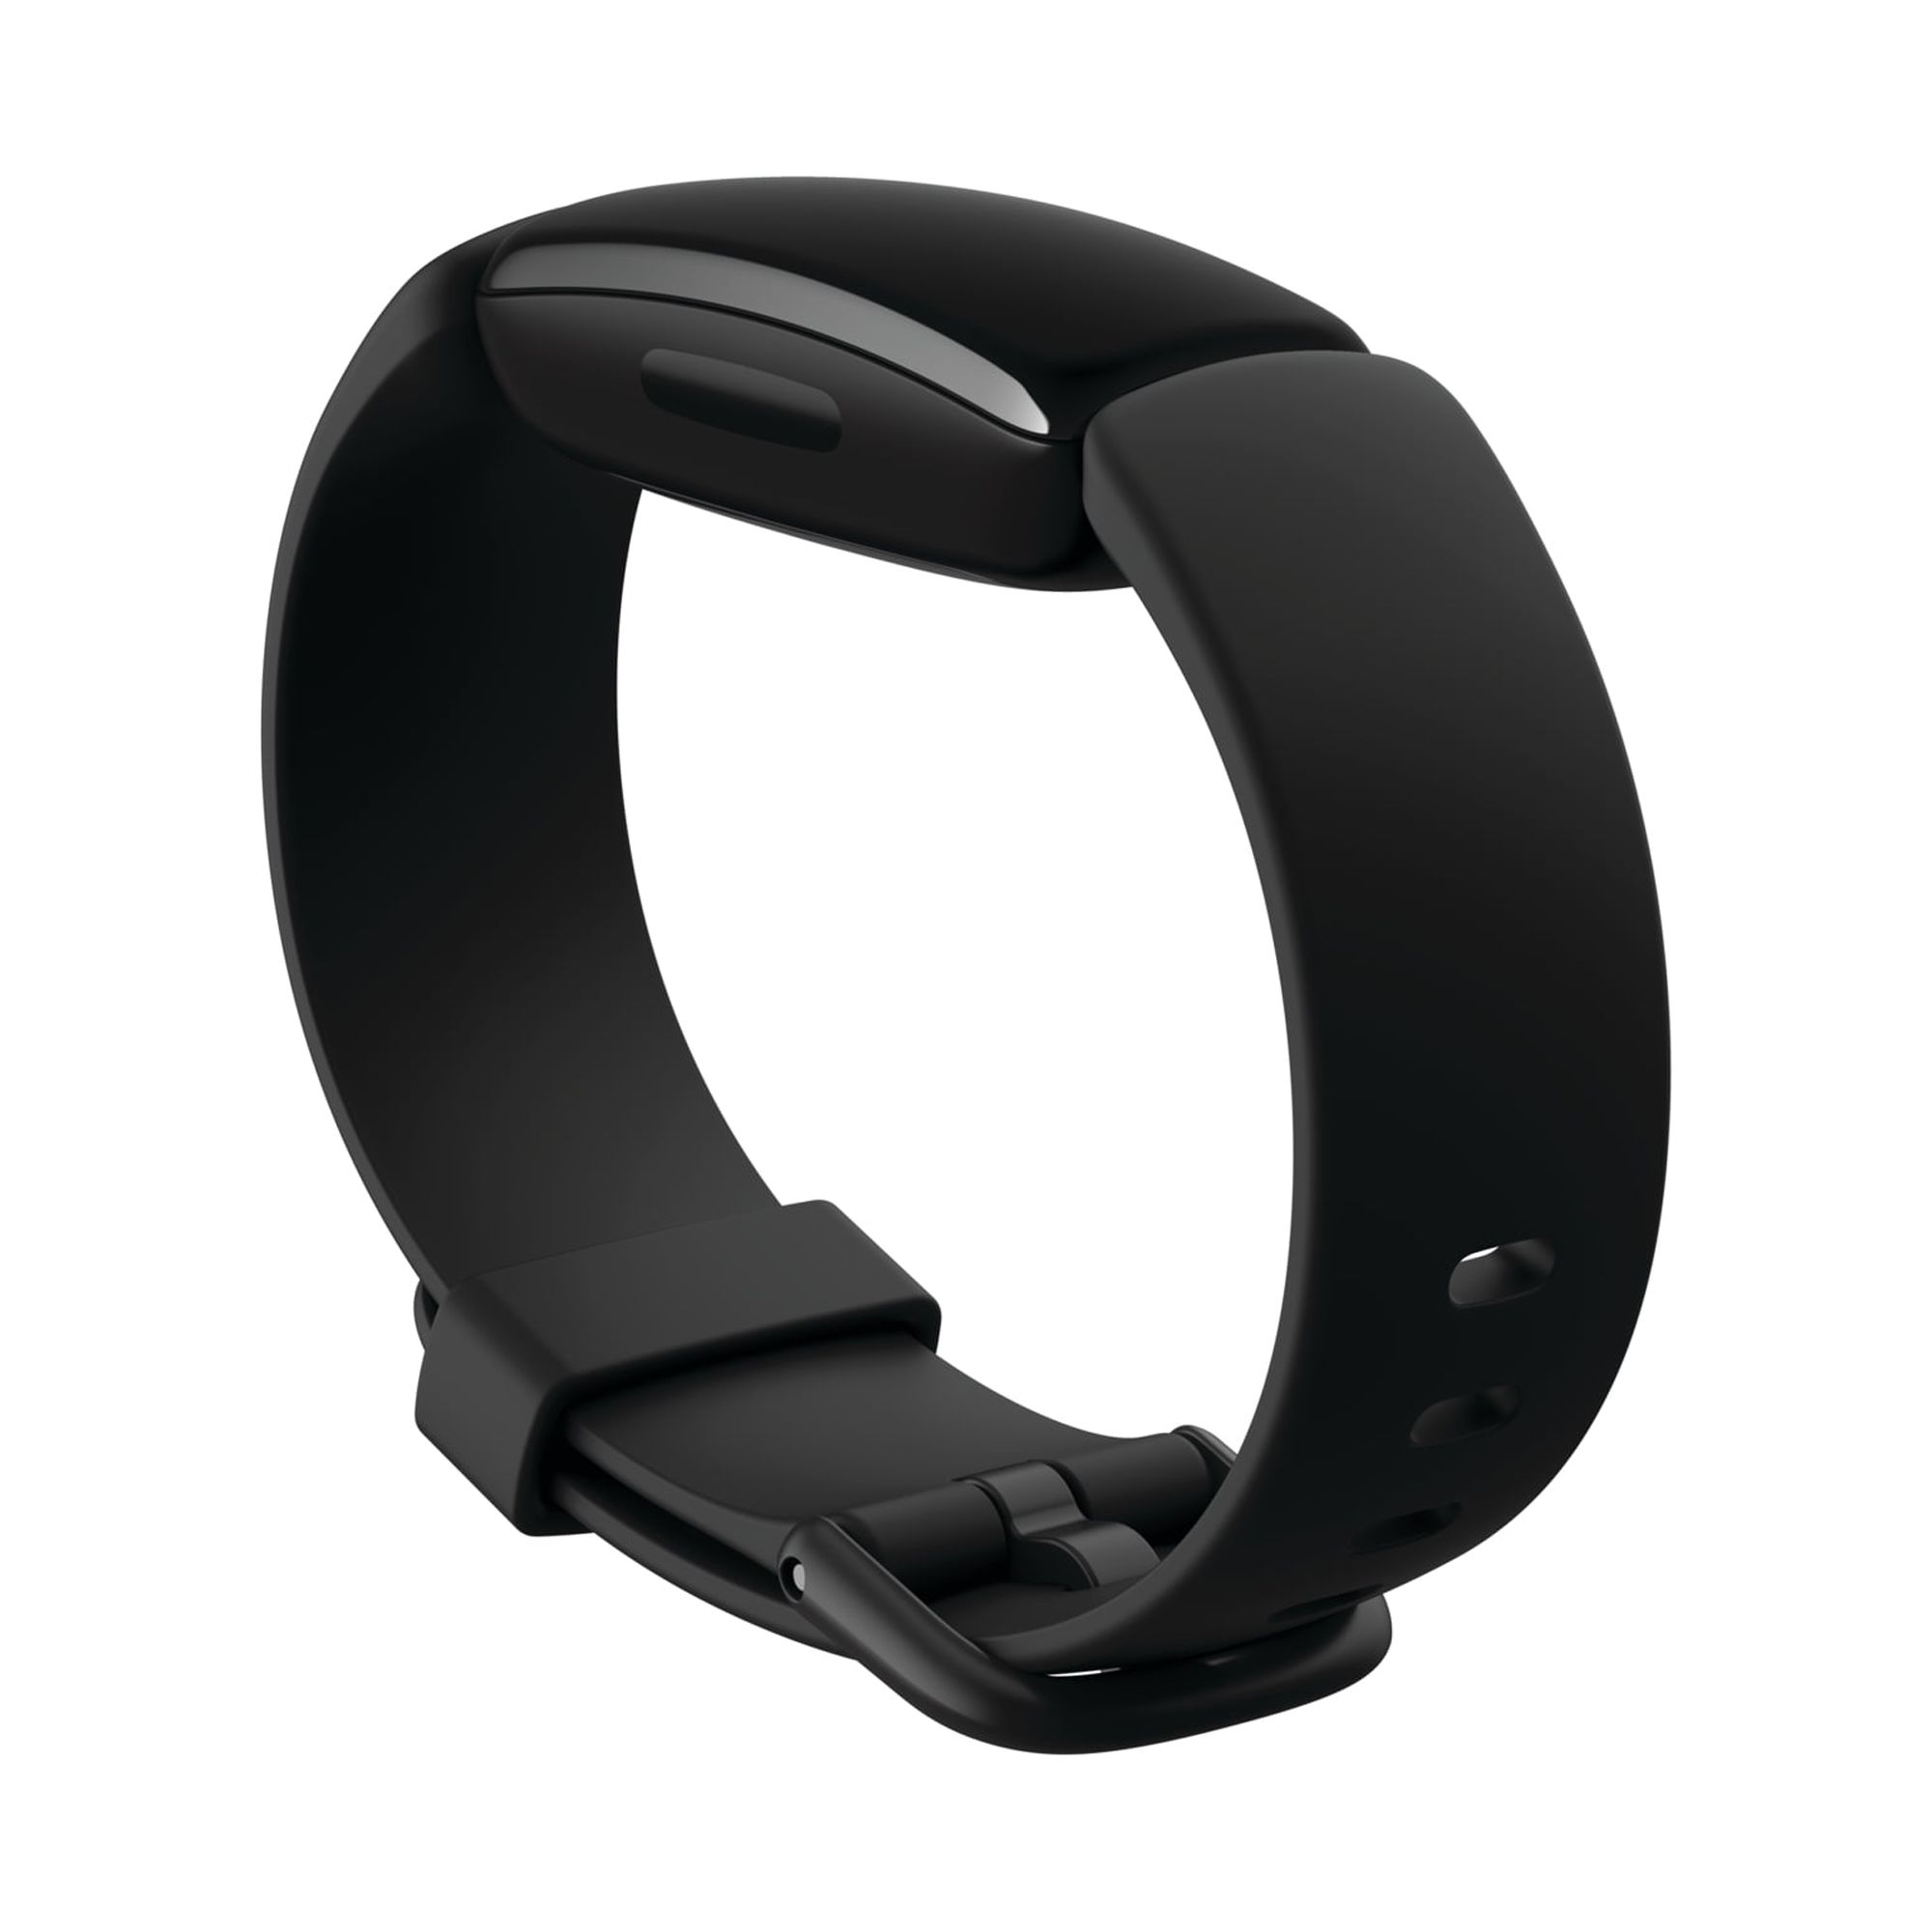 Fitbit Inspire 2 Fitness Tracker - Black - image 4 of 6